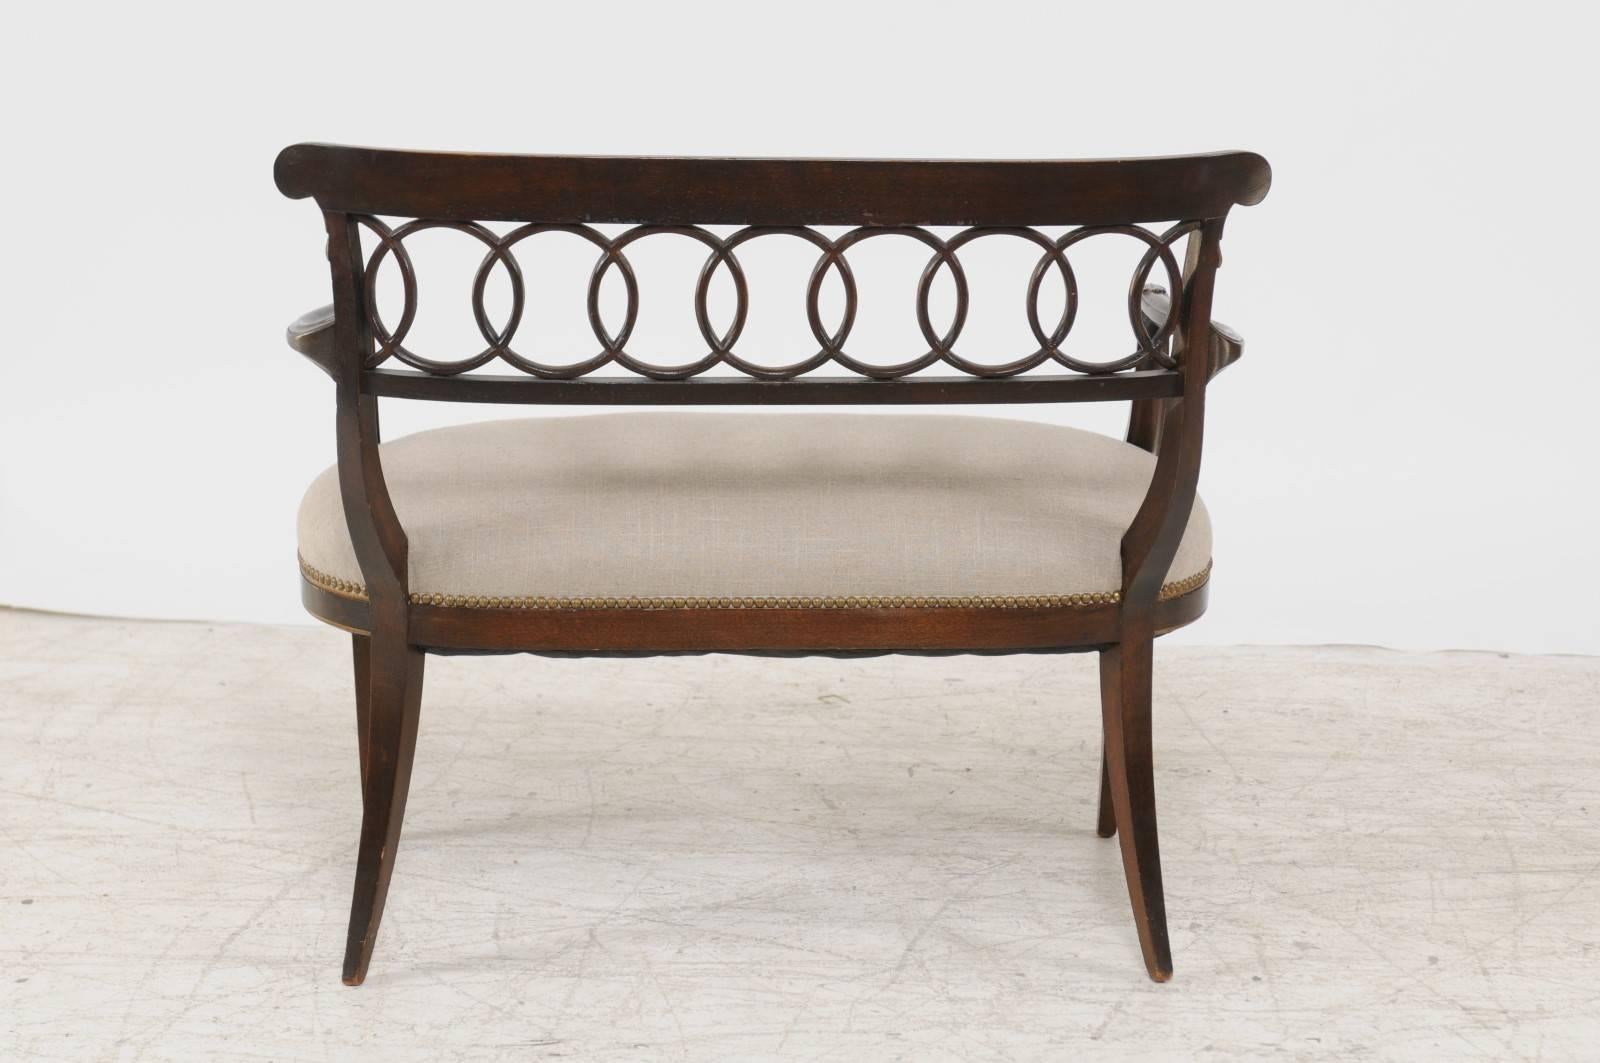 Pair of Italian 1870s Carved Wood Parcel-Gilt Benches with Intertwined Rings 2